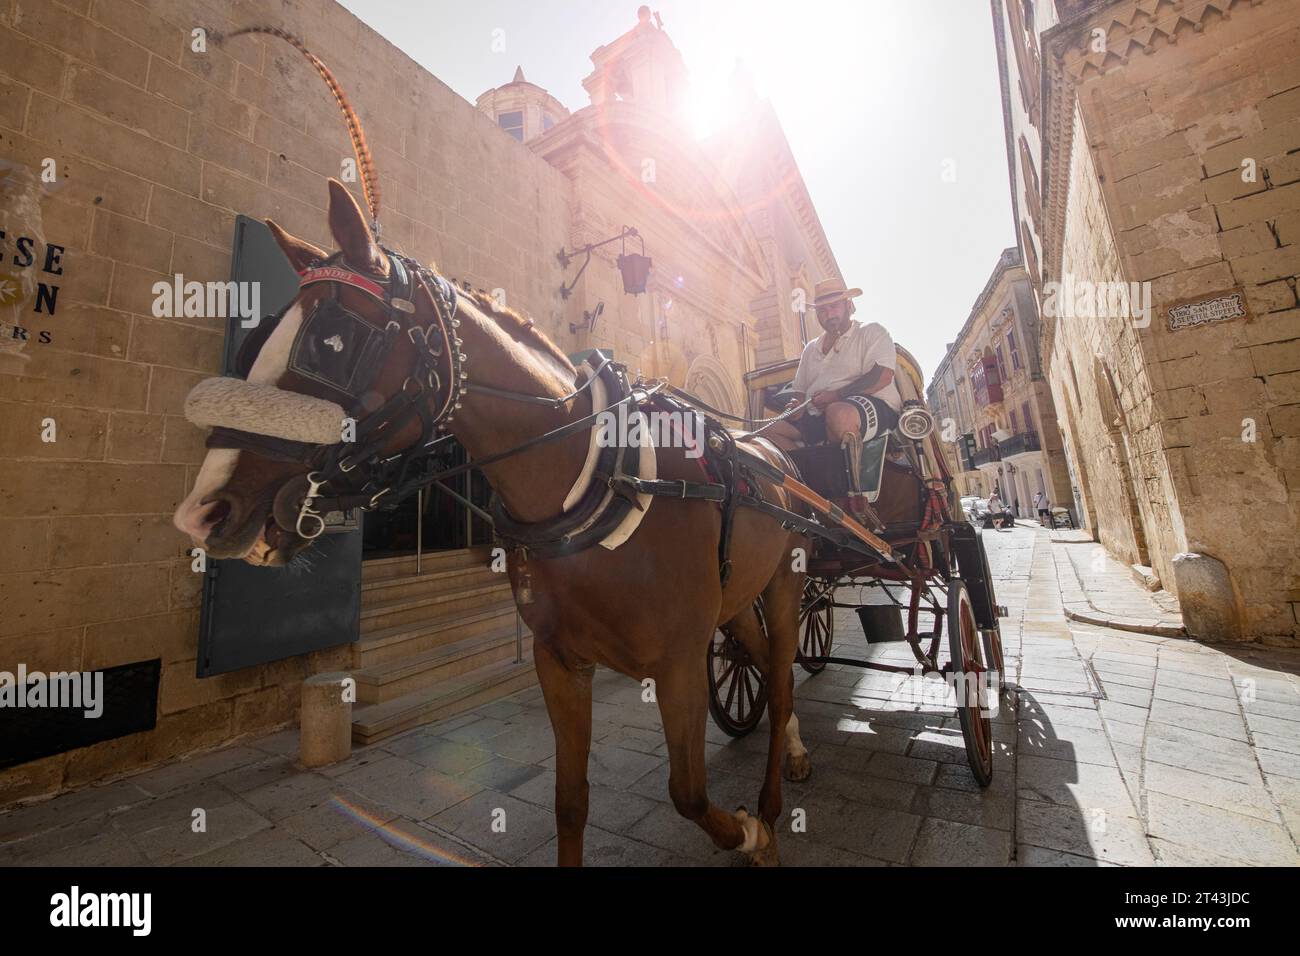 Horse and carriage transport in the historic city of Mdina in Malta Stock Photo